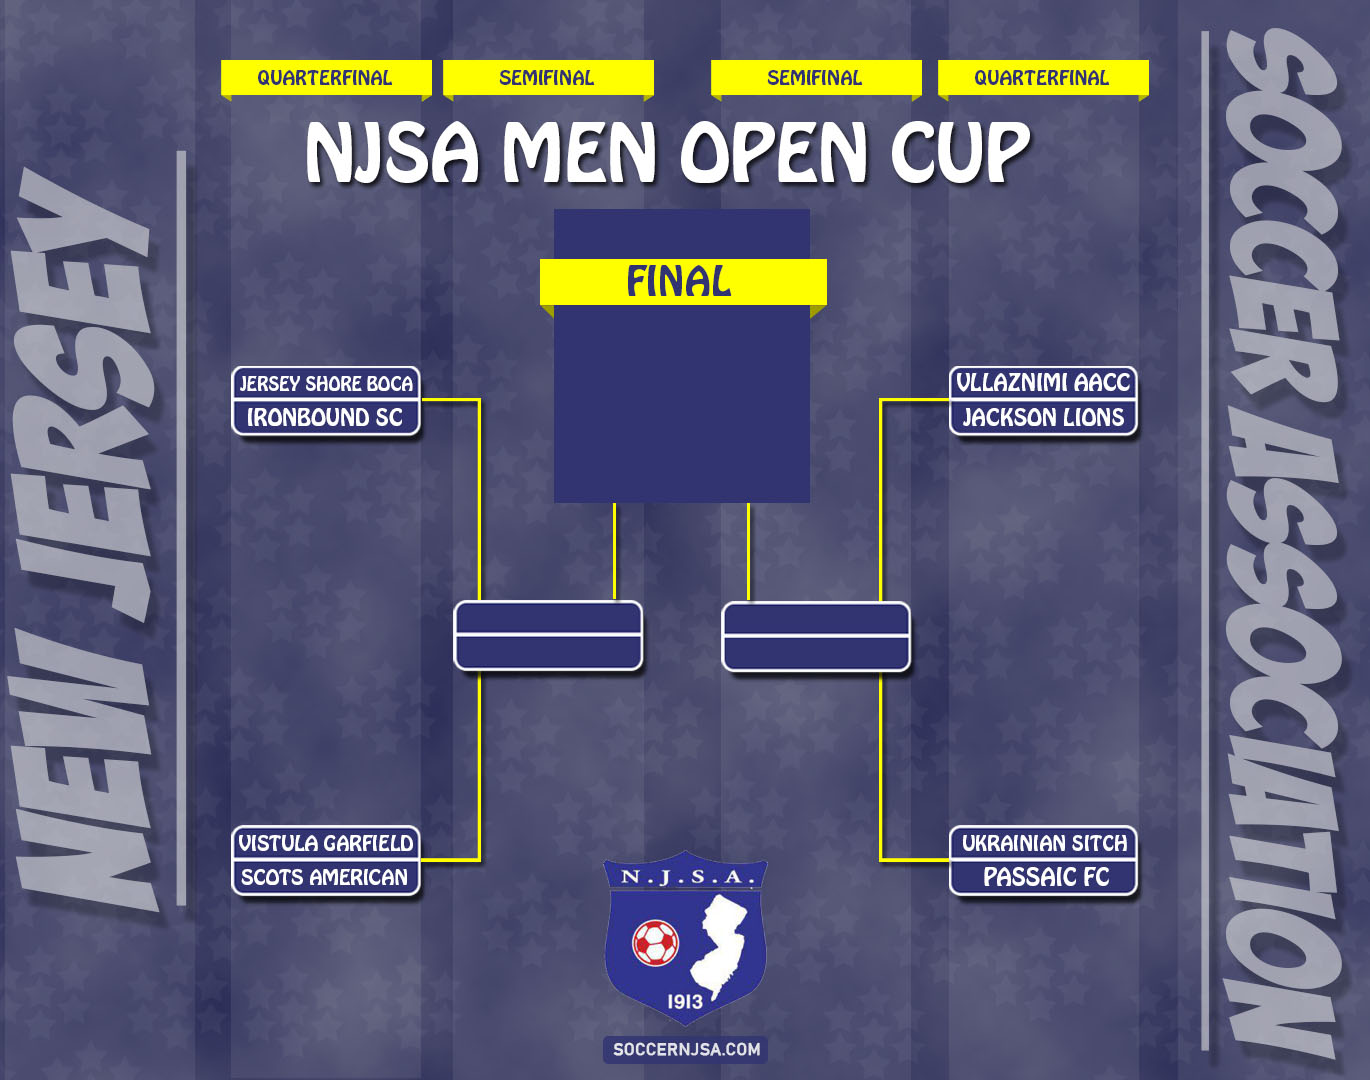 NJSA MEN OPEN AND O-30 STATE CUP BRACKETS